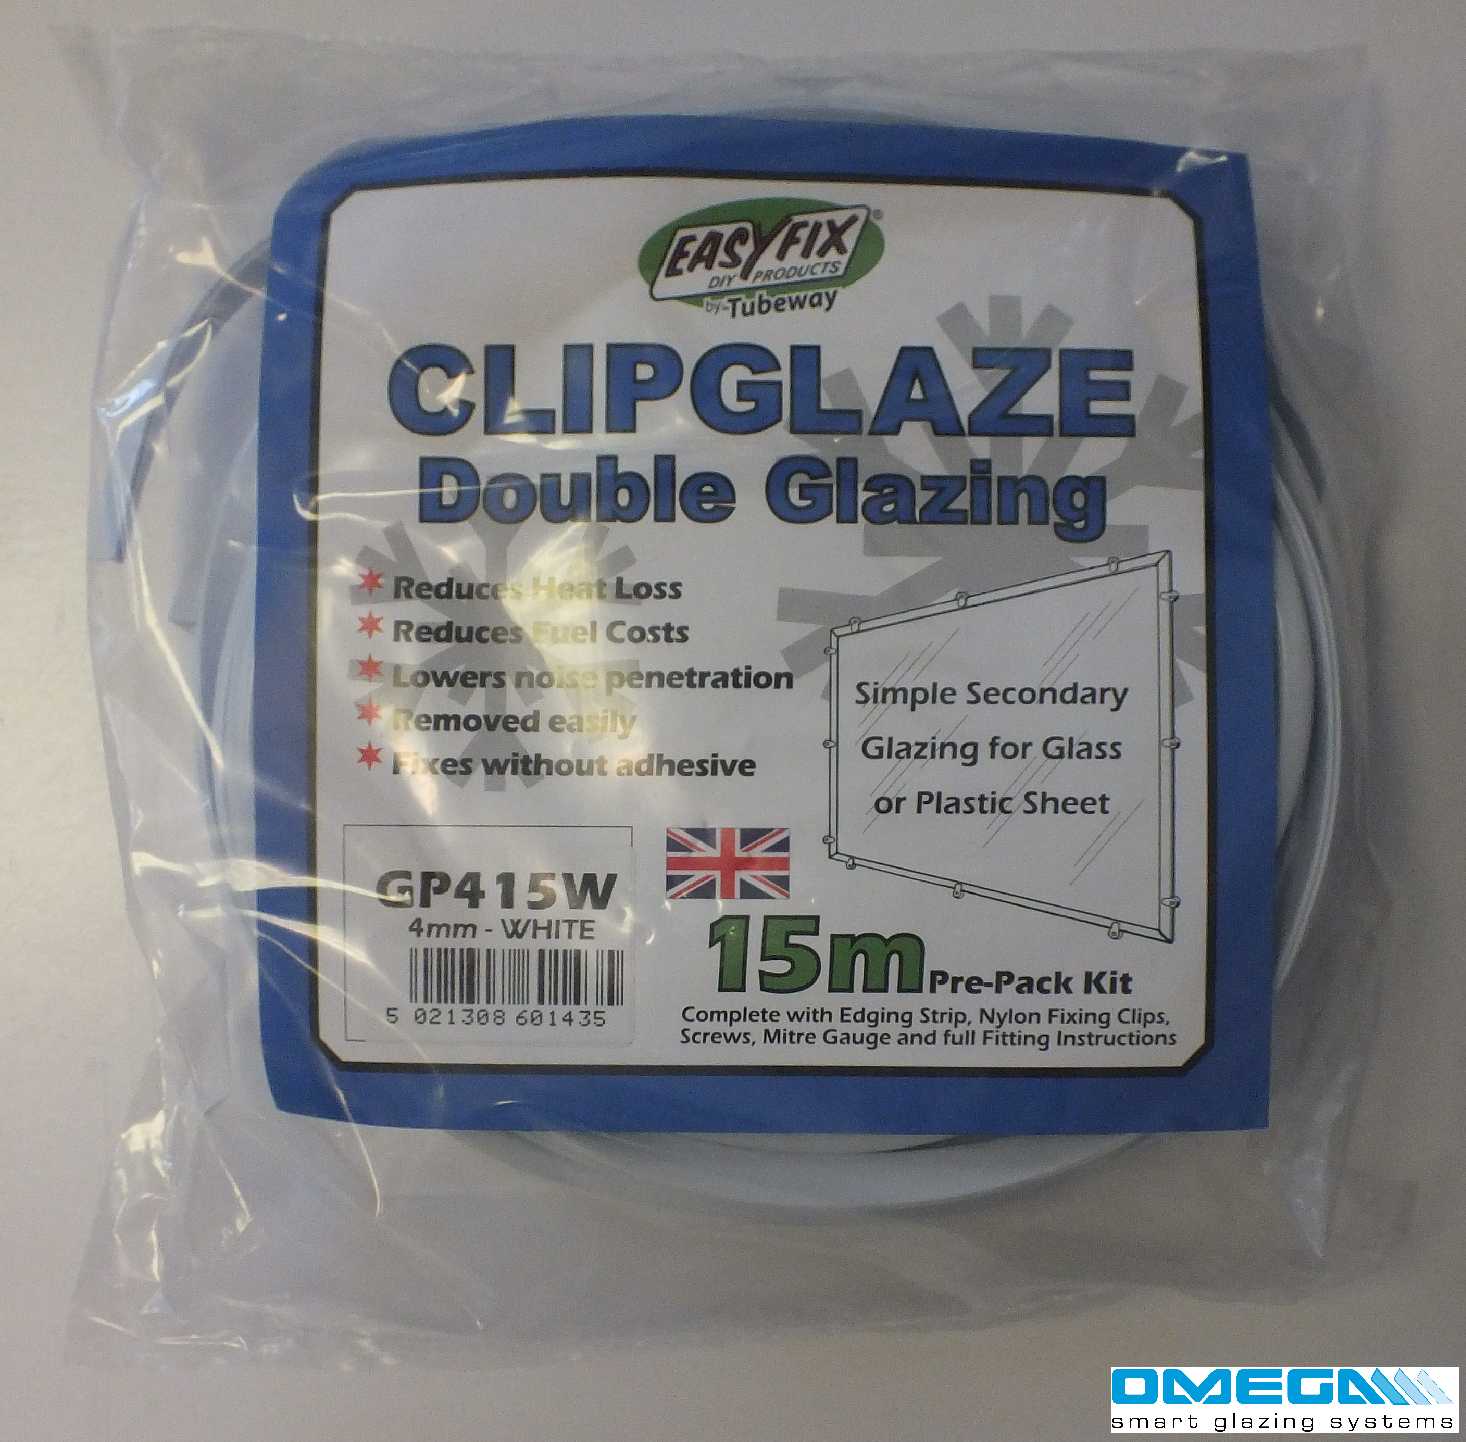 Easyfix Clipglaze Edging Kit - 15m roll of edging for 6mm Glazing Thickness, White from Omega Build